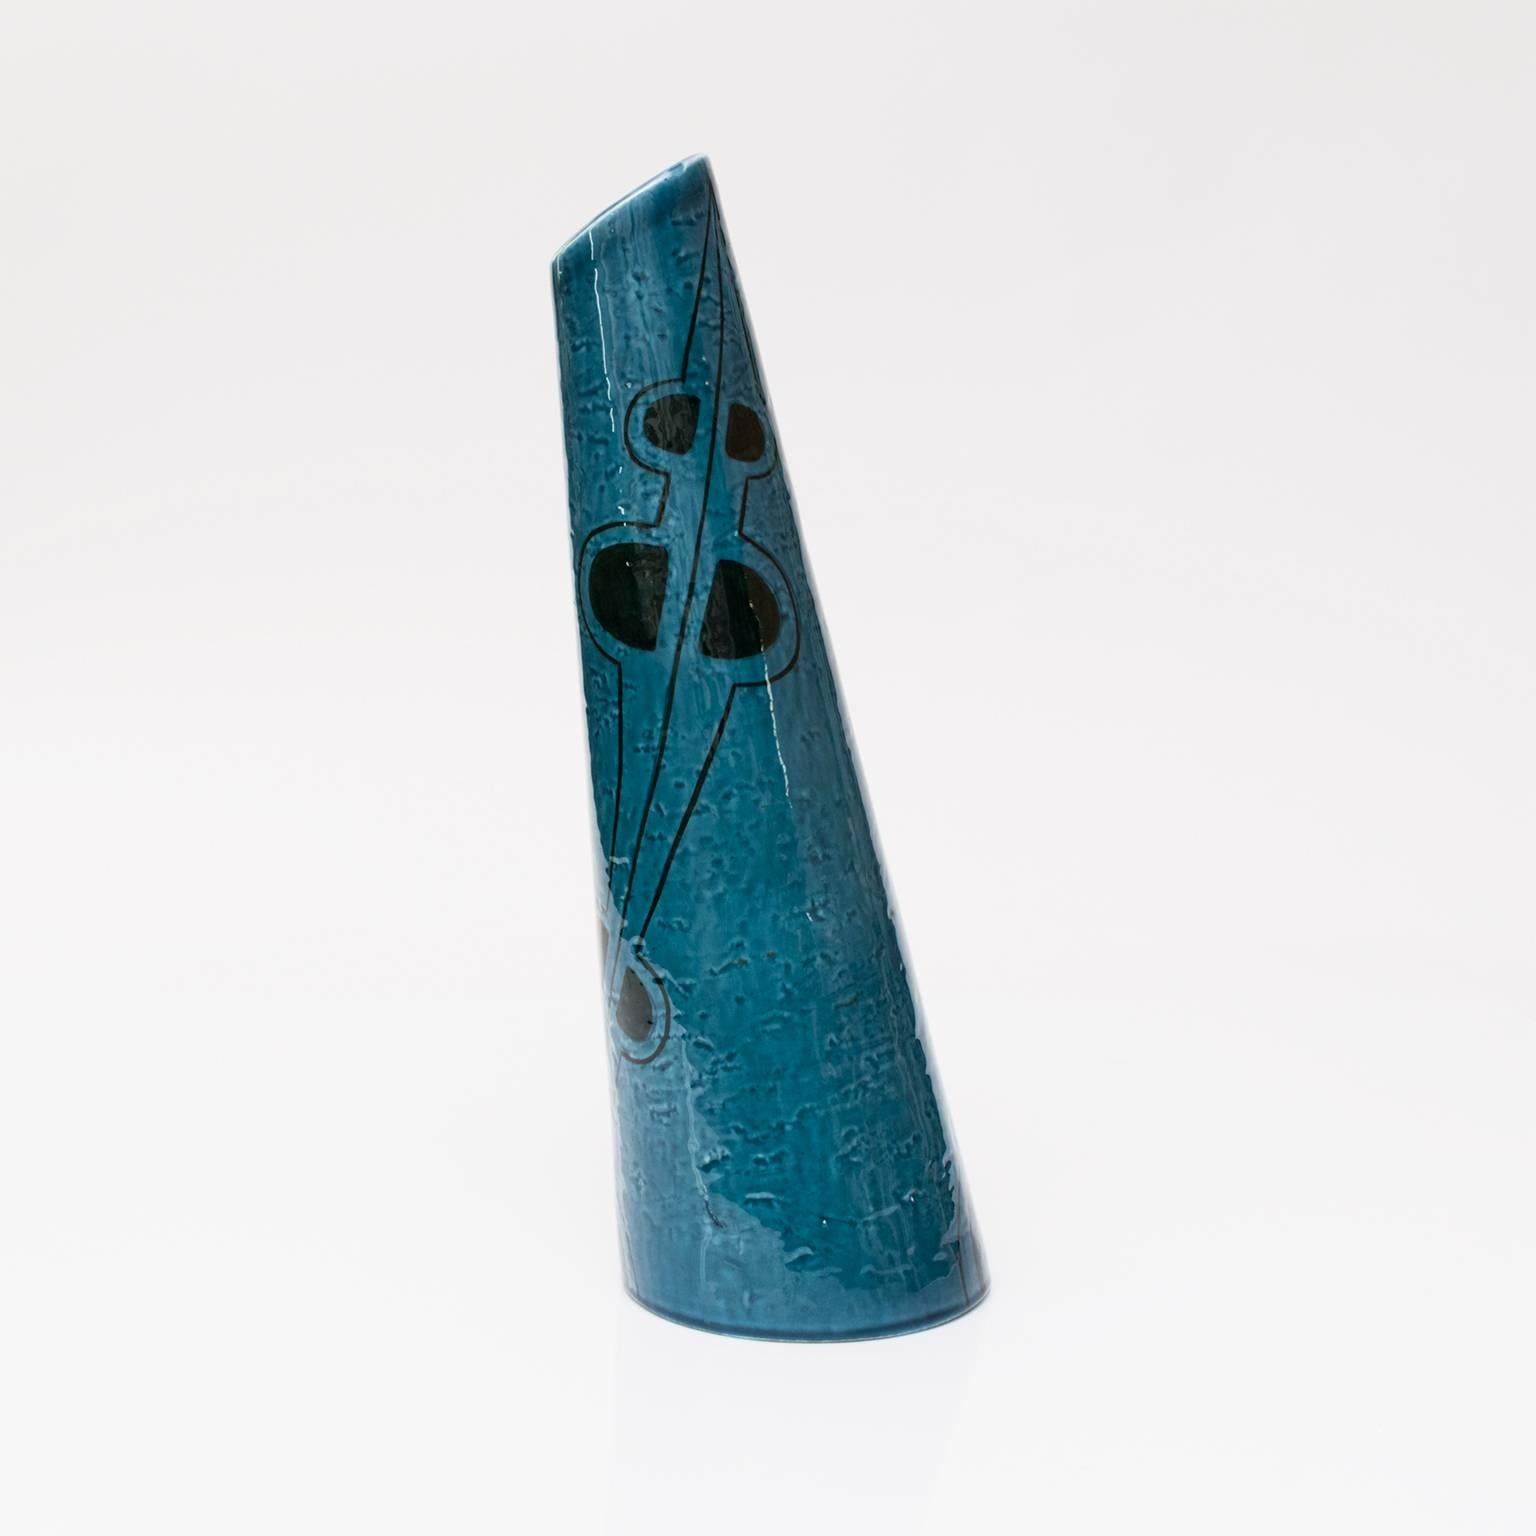 Scandinavian Modern, Rorstrand ceramic tilted or angled vase with black and blue abstract design by Vilhelm Berke Petersen. Petersen studied under artists Paul Klee and Wassily Kandinsky at Bauhaus Dessau from 1930-1931.
 
Measures: Height: